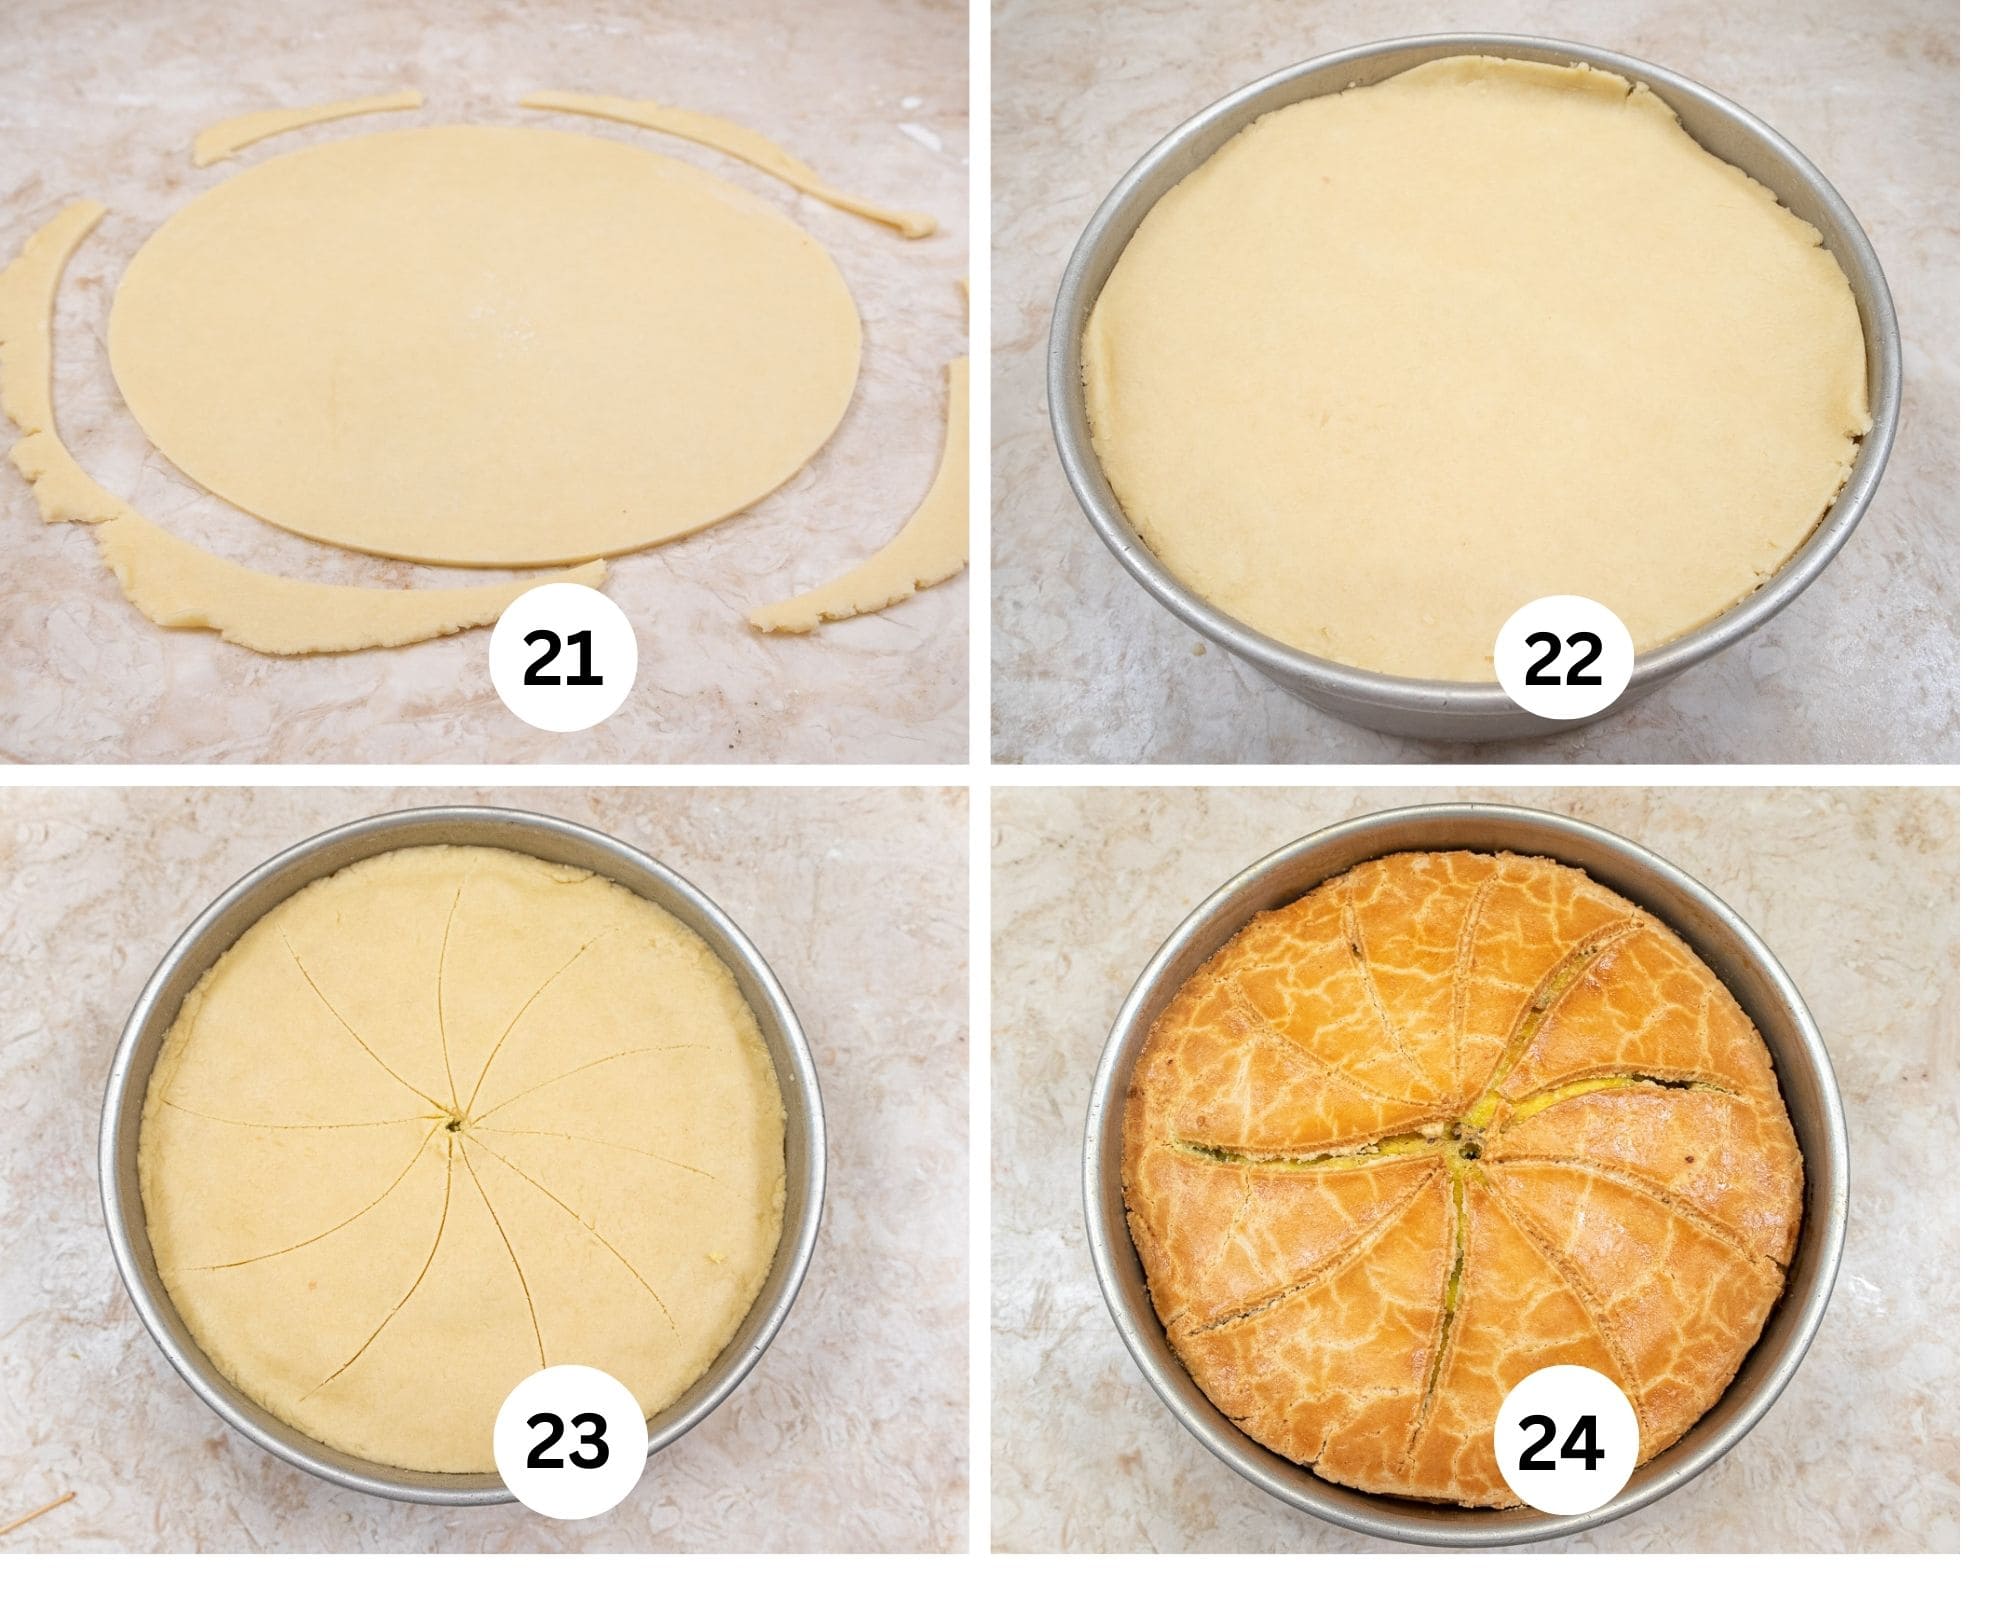 The last collage shows the dough cut into a circle, placed on top of the omelet, marked for servings and baked to a medium golden brown.